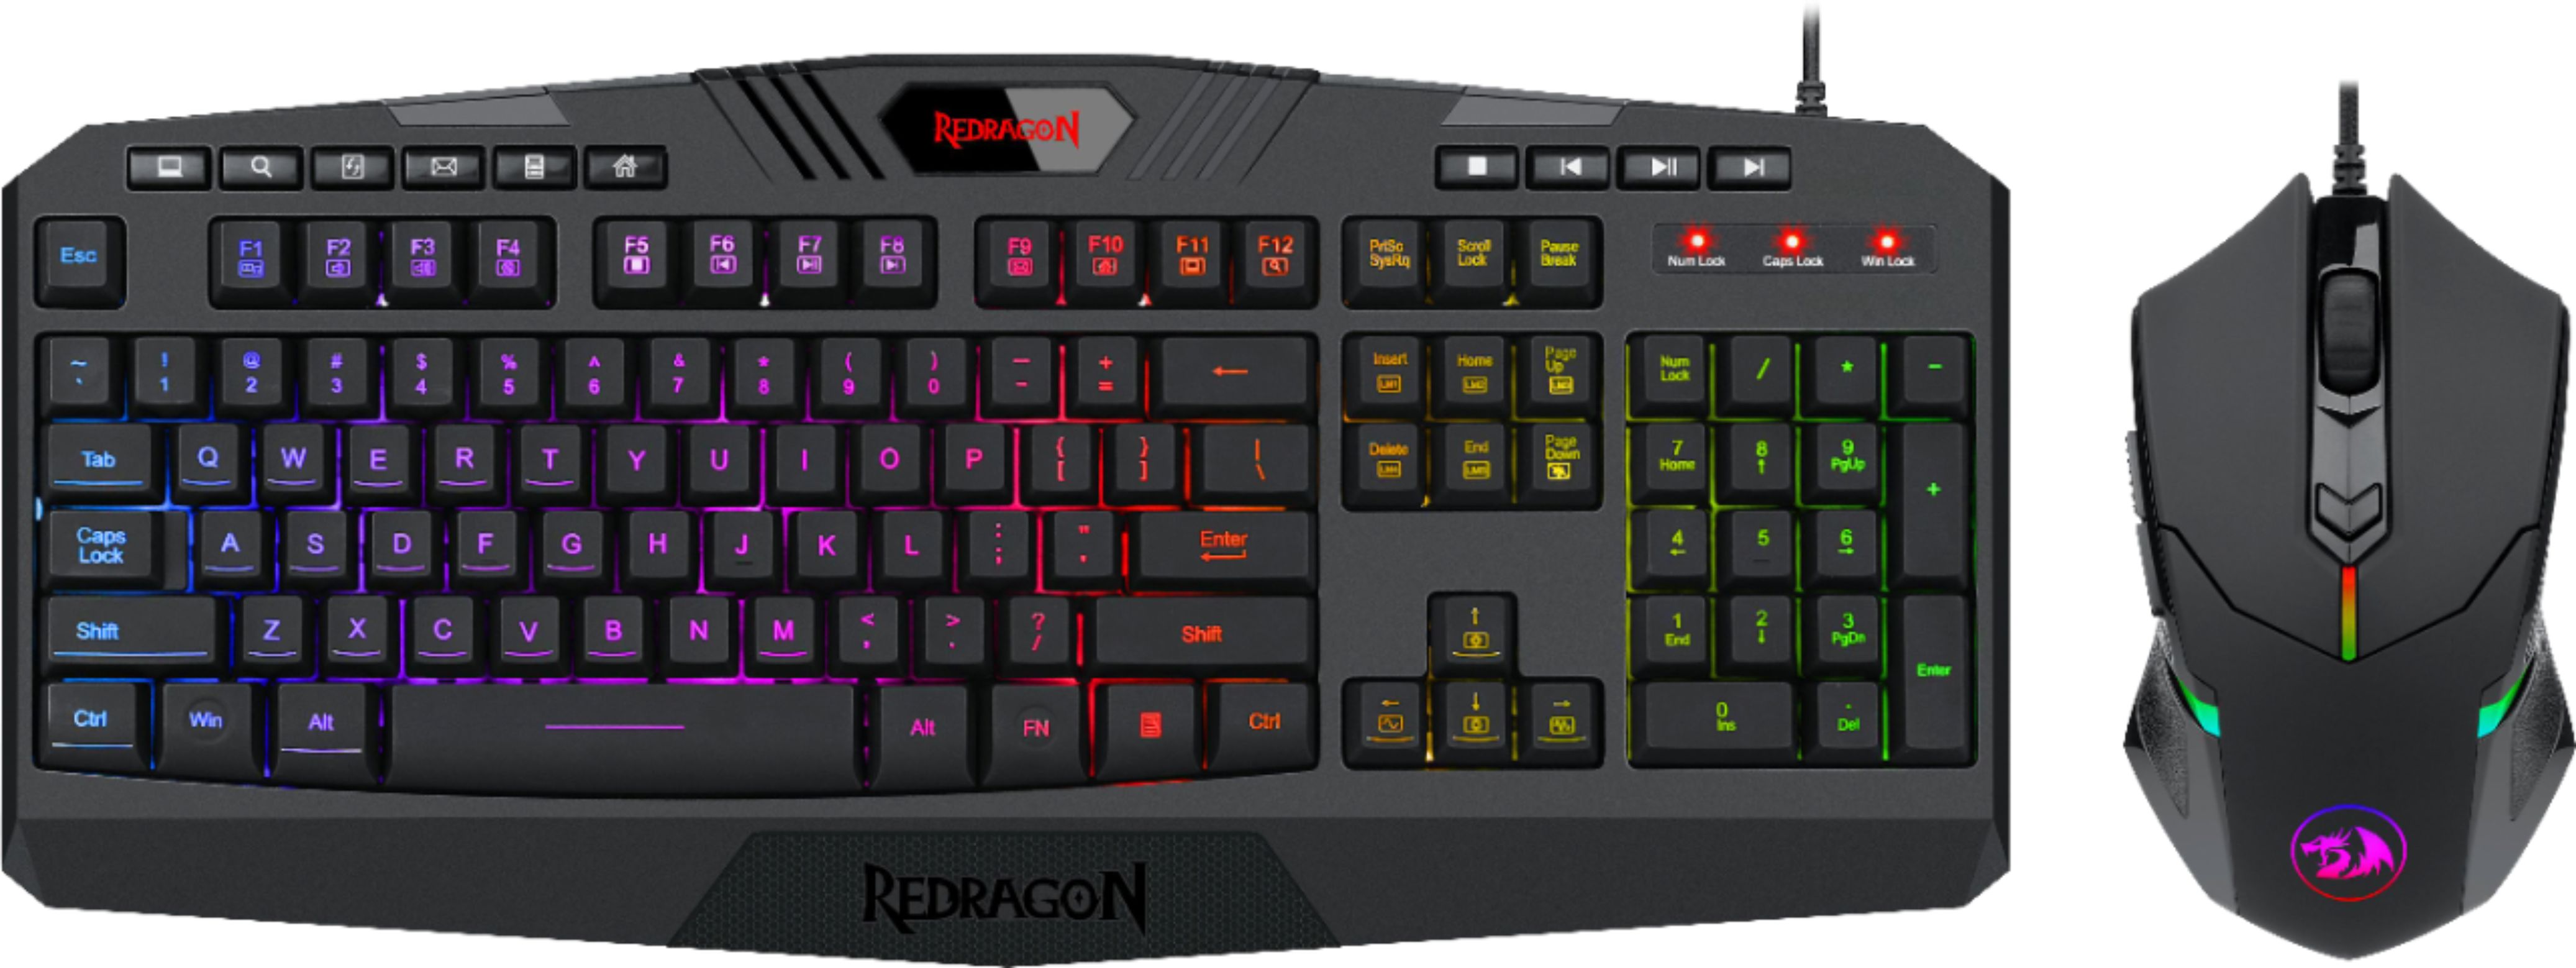 personificering Hysterisk morsom Forstyrret REDRAGON S101-5 Wired Gaming Keyboard and Optical Mouse Gaming Bundle with  RGB Backlighting Black S101-5 - Best Buy